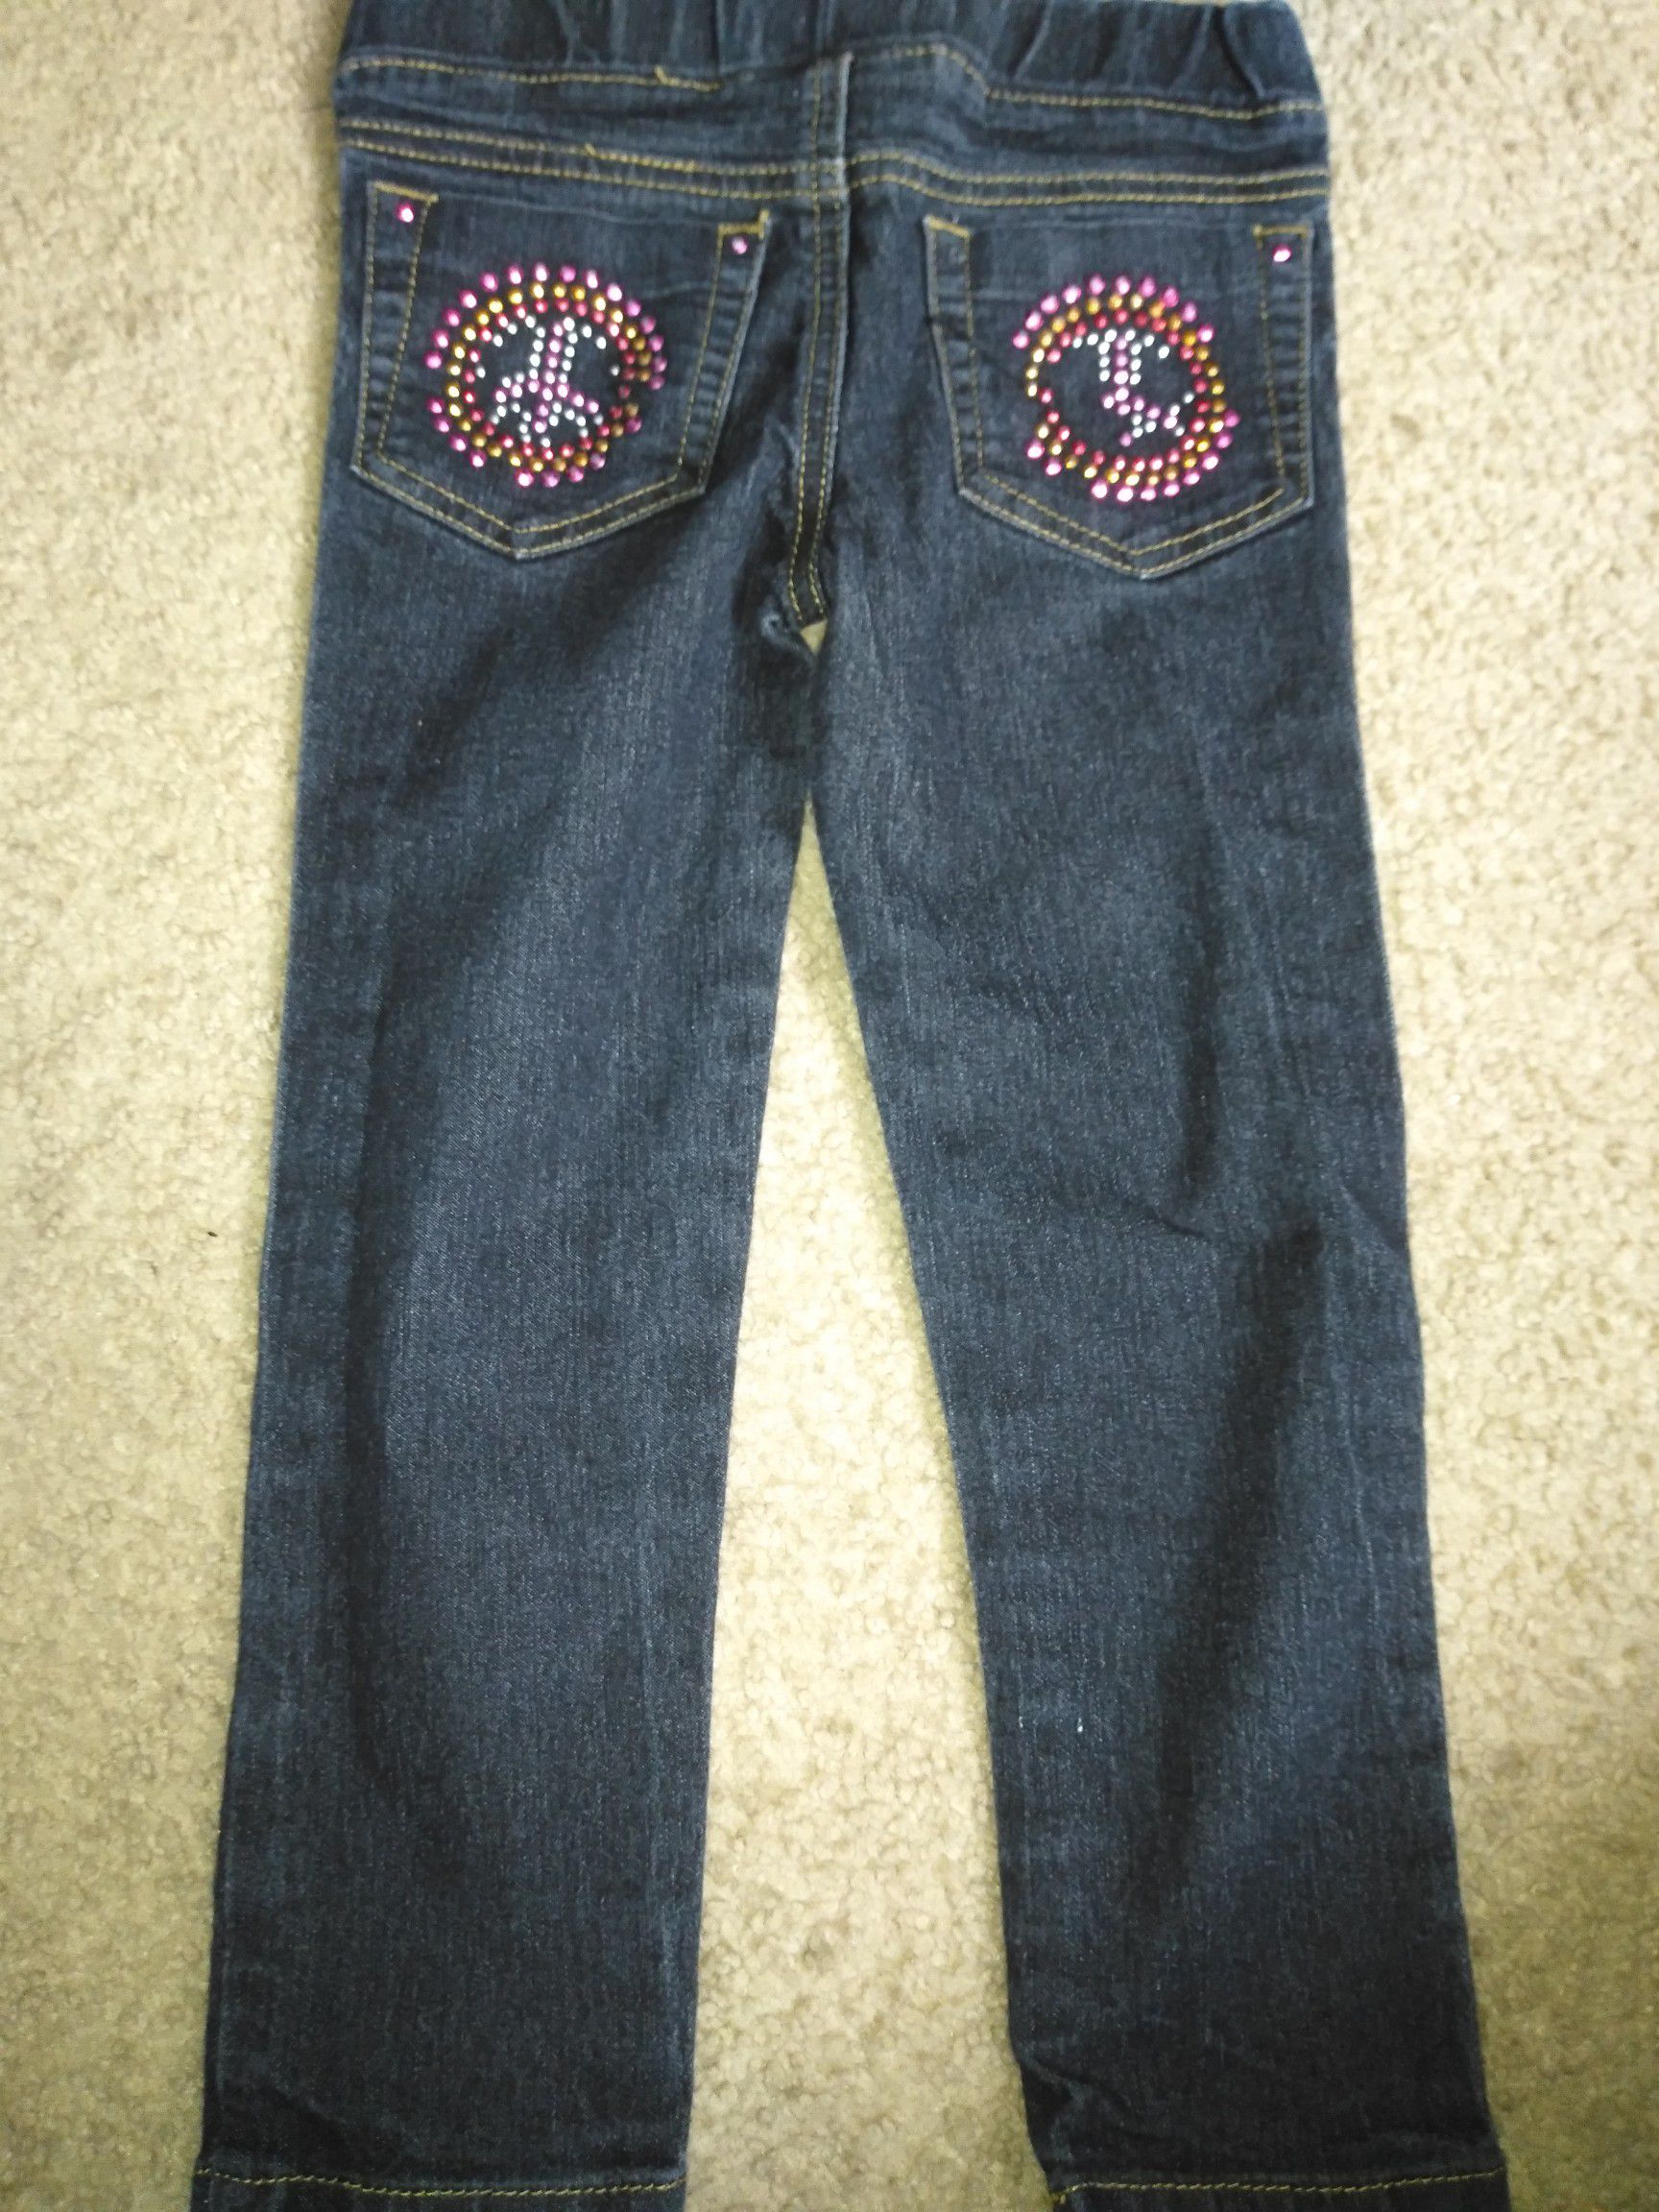 Jean Stretch for girl size 5 good condition